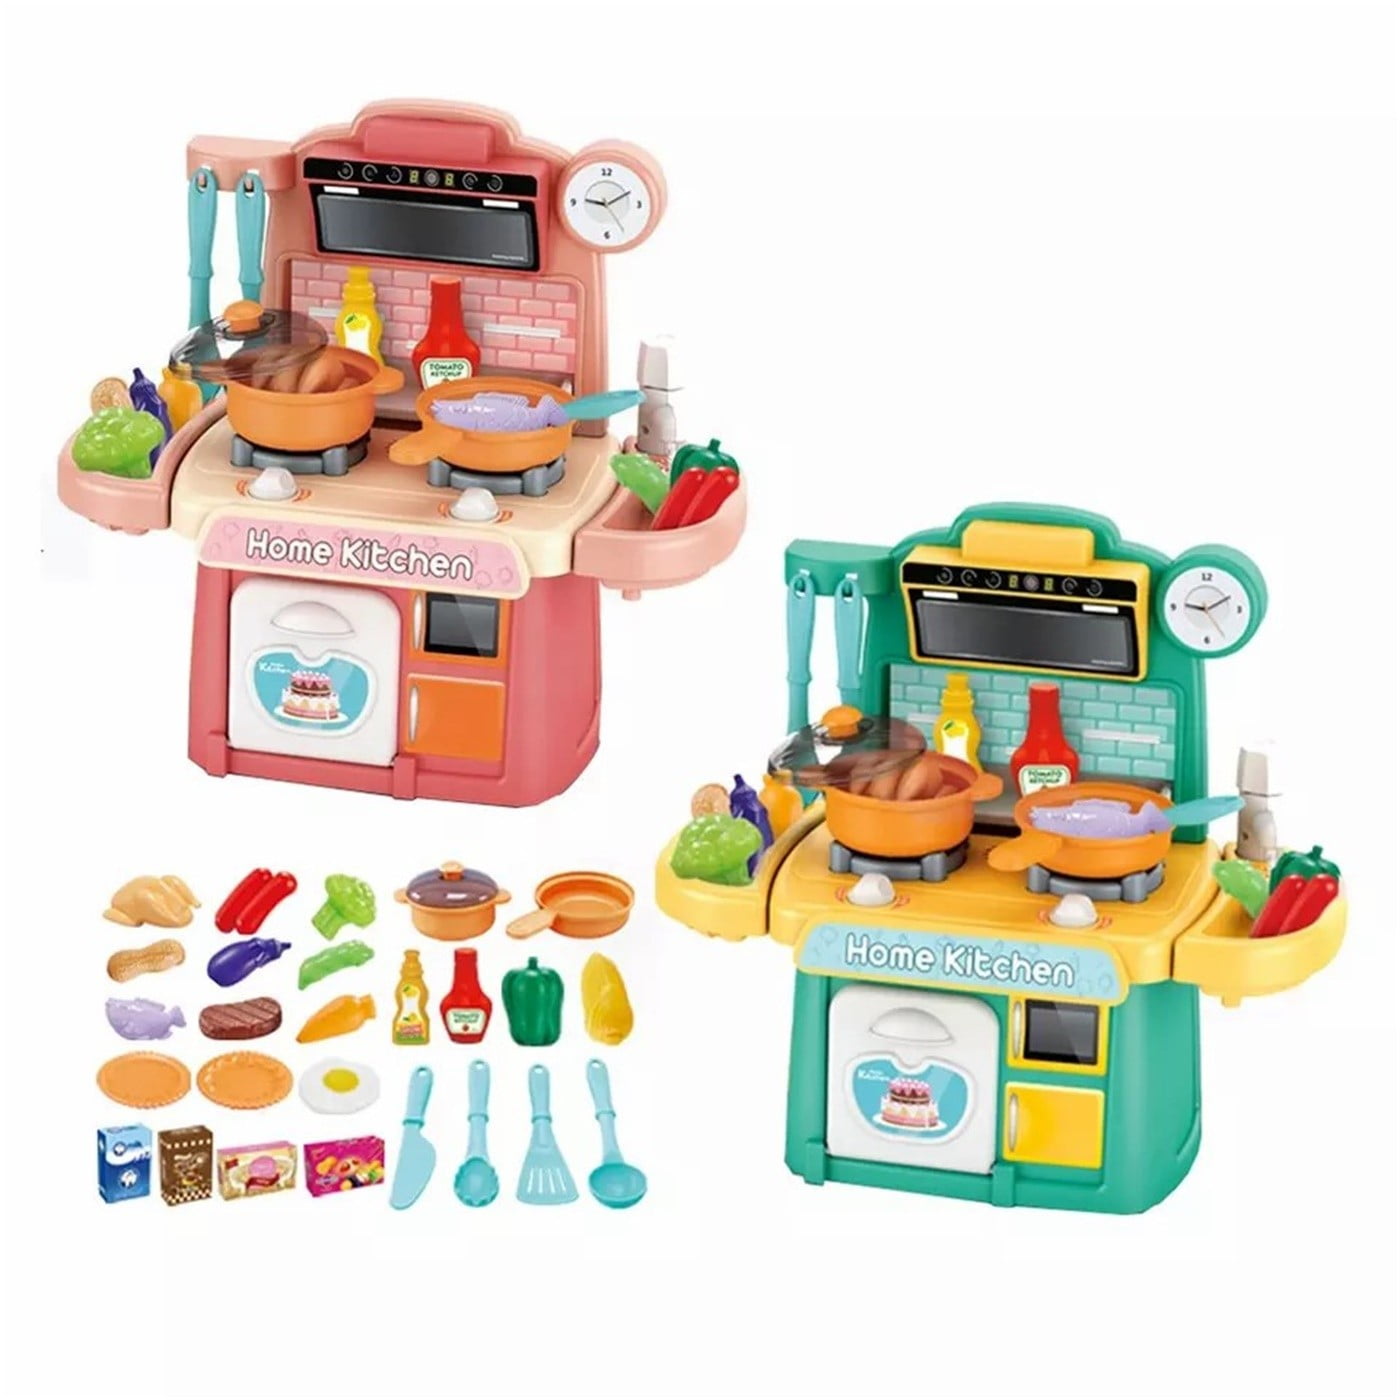 Wisairt Play Kitchen Set for Kids, 3ft Tall Kids Play Kitchen with Realistic Lights and Sounds, Simulation of Spray, 88pcs Toy Kitchen Set for